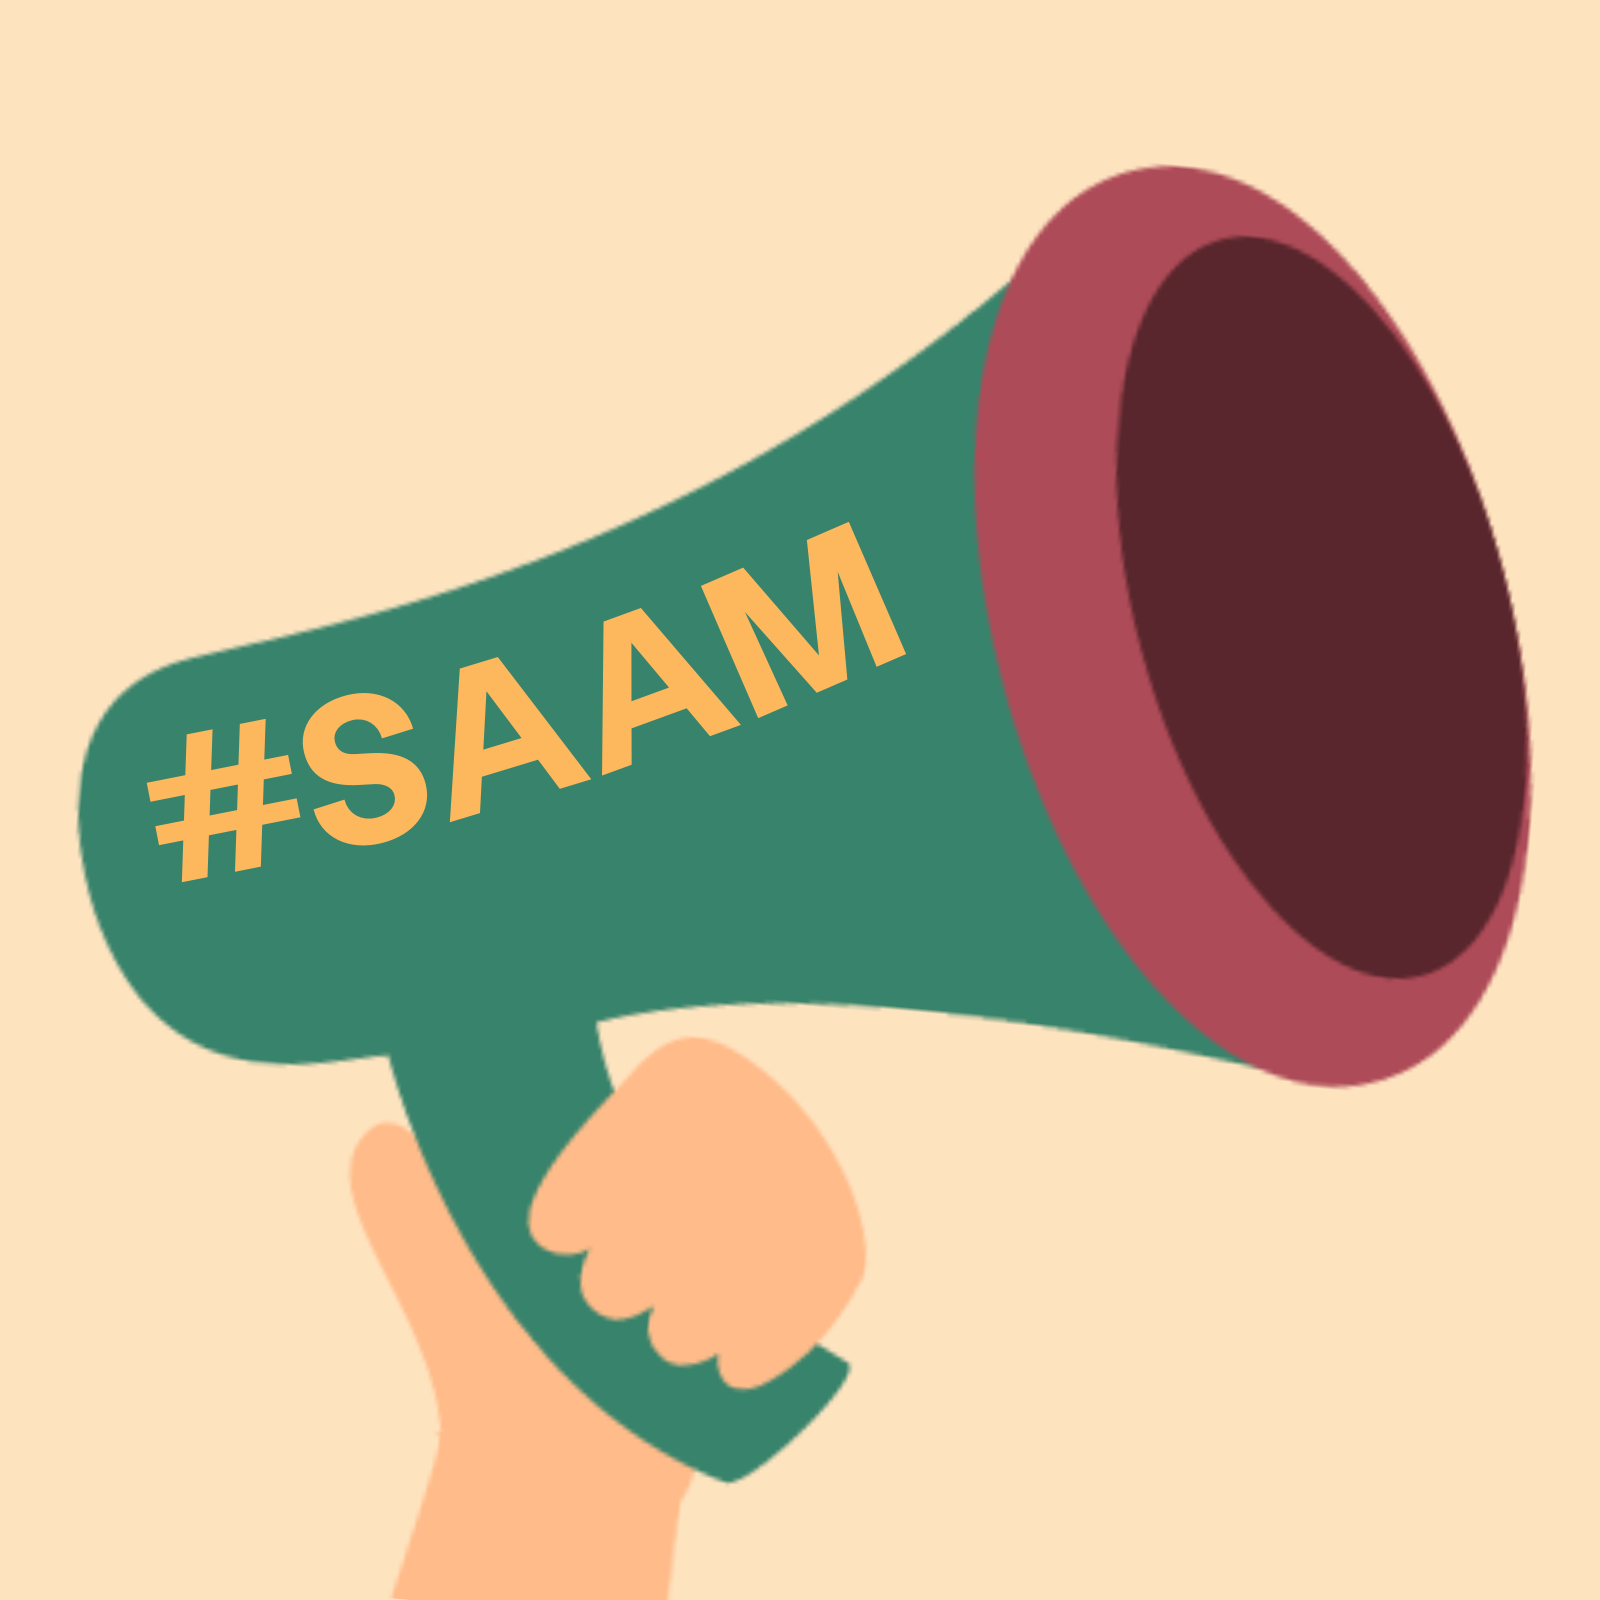 Hand holding green megaphone with red trim with #SAAM written on side